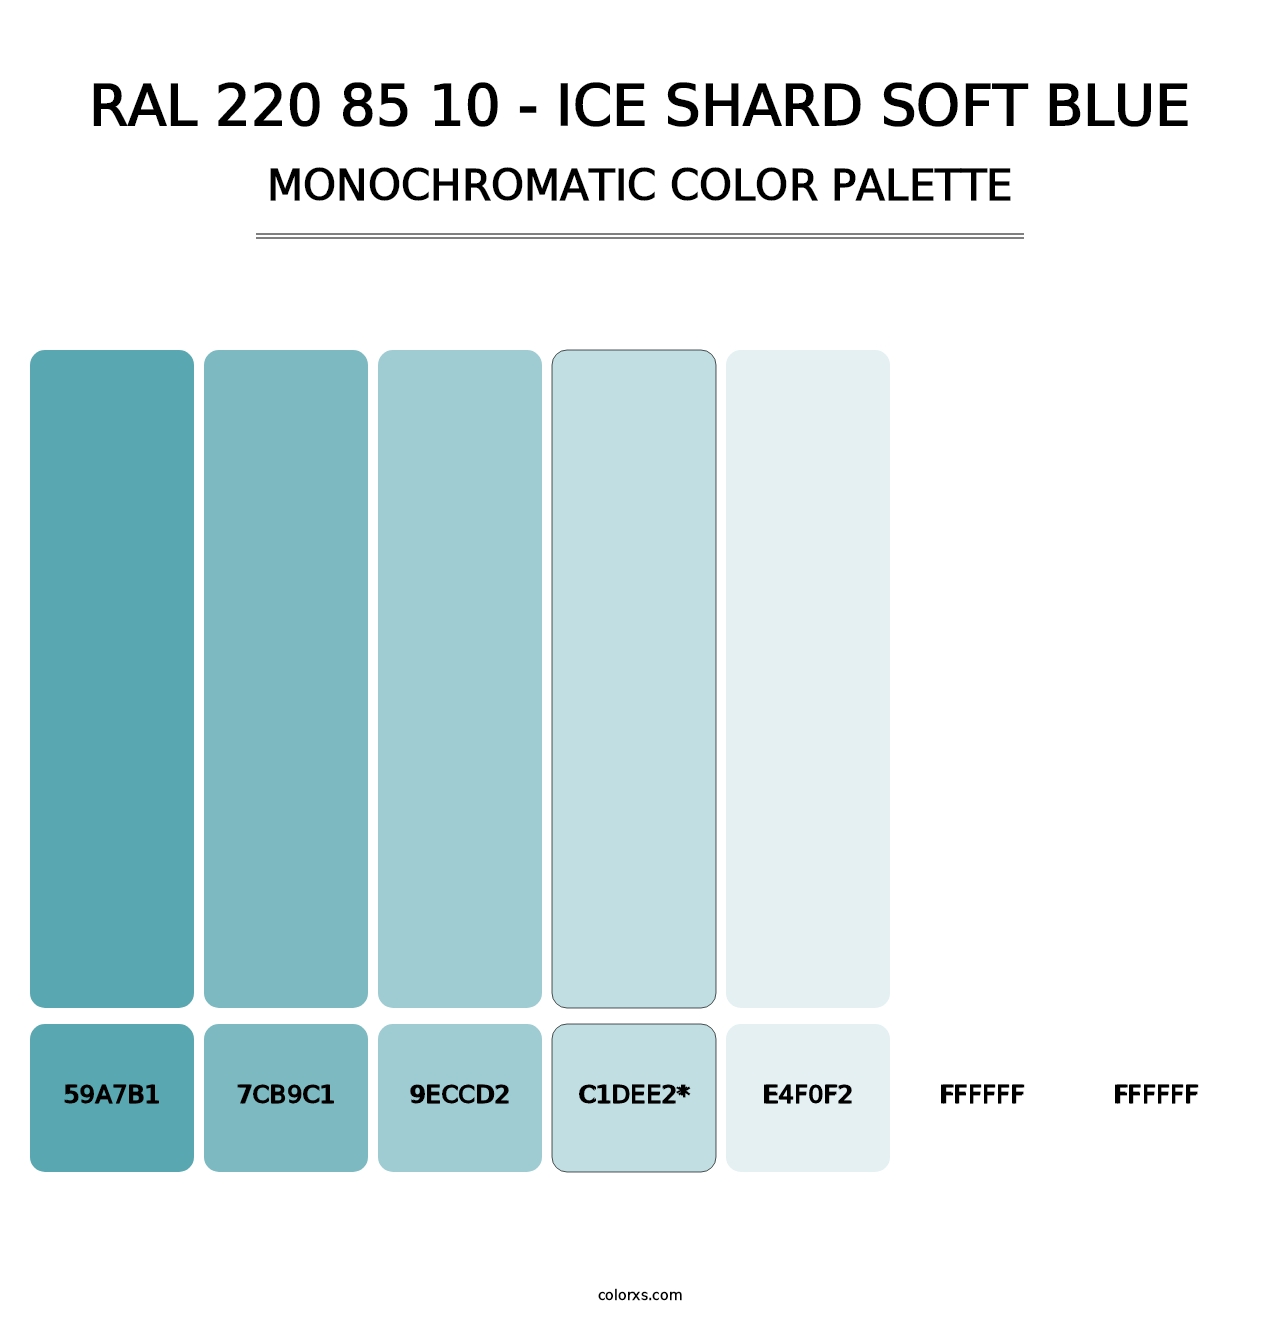 RAL 220 85 10 - Ice Shard Soft Blue - Monochromatic Color Palette